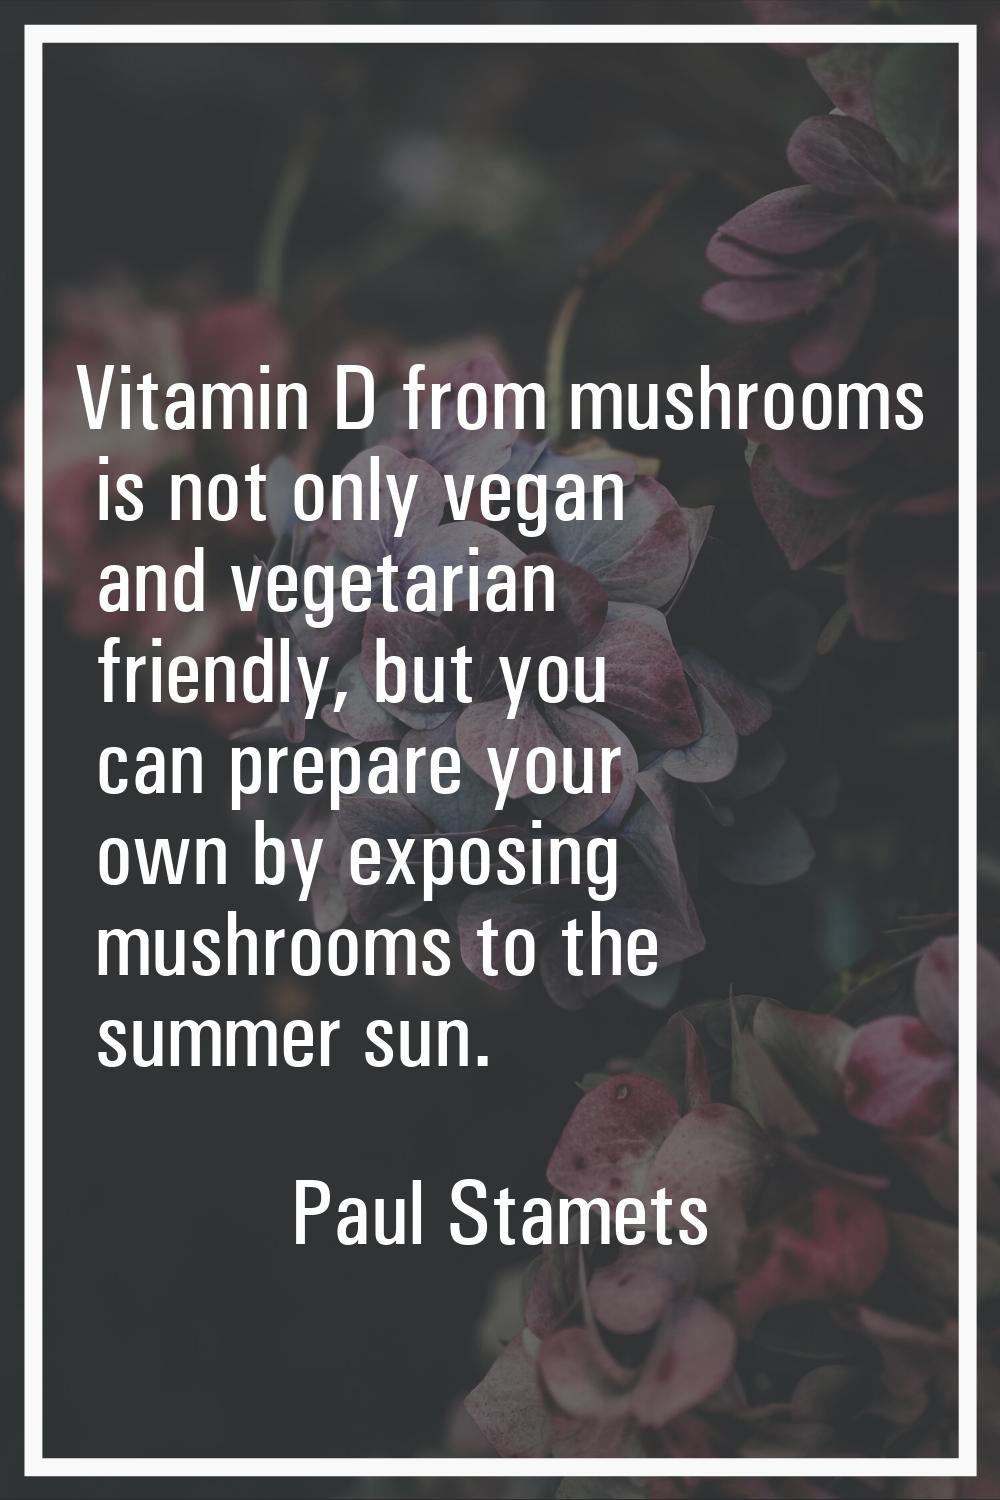 Vitamin D from mushrooms is not only vegan and vegetarian friendly, but you can prepare your own by